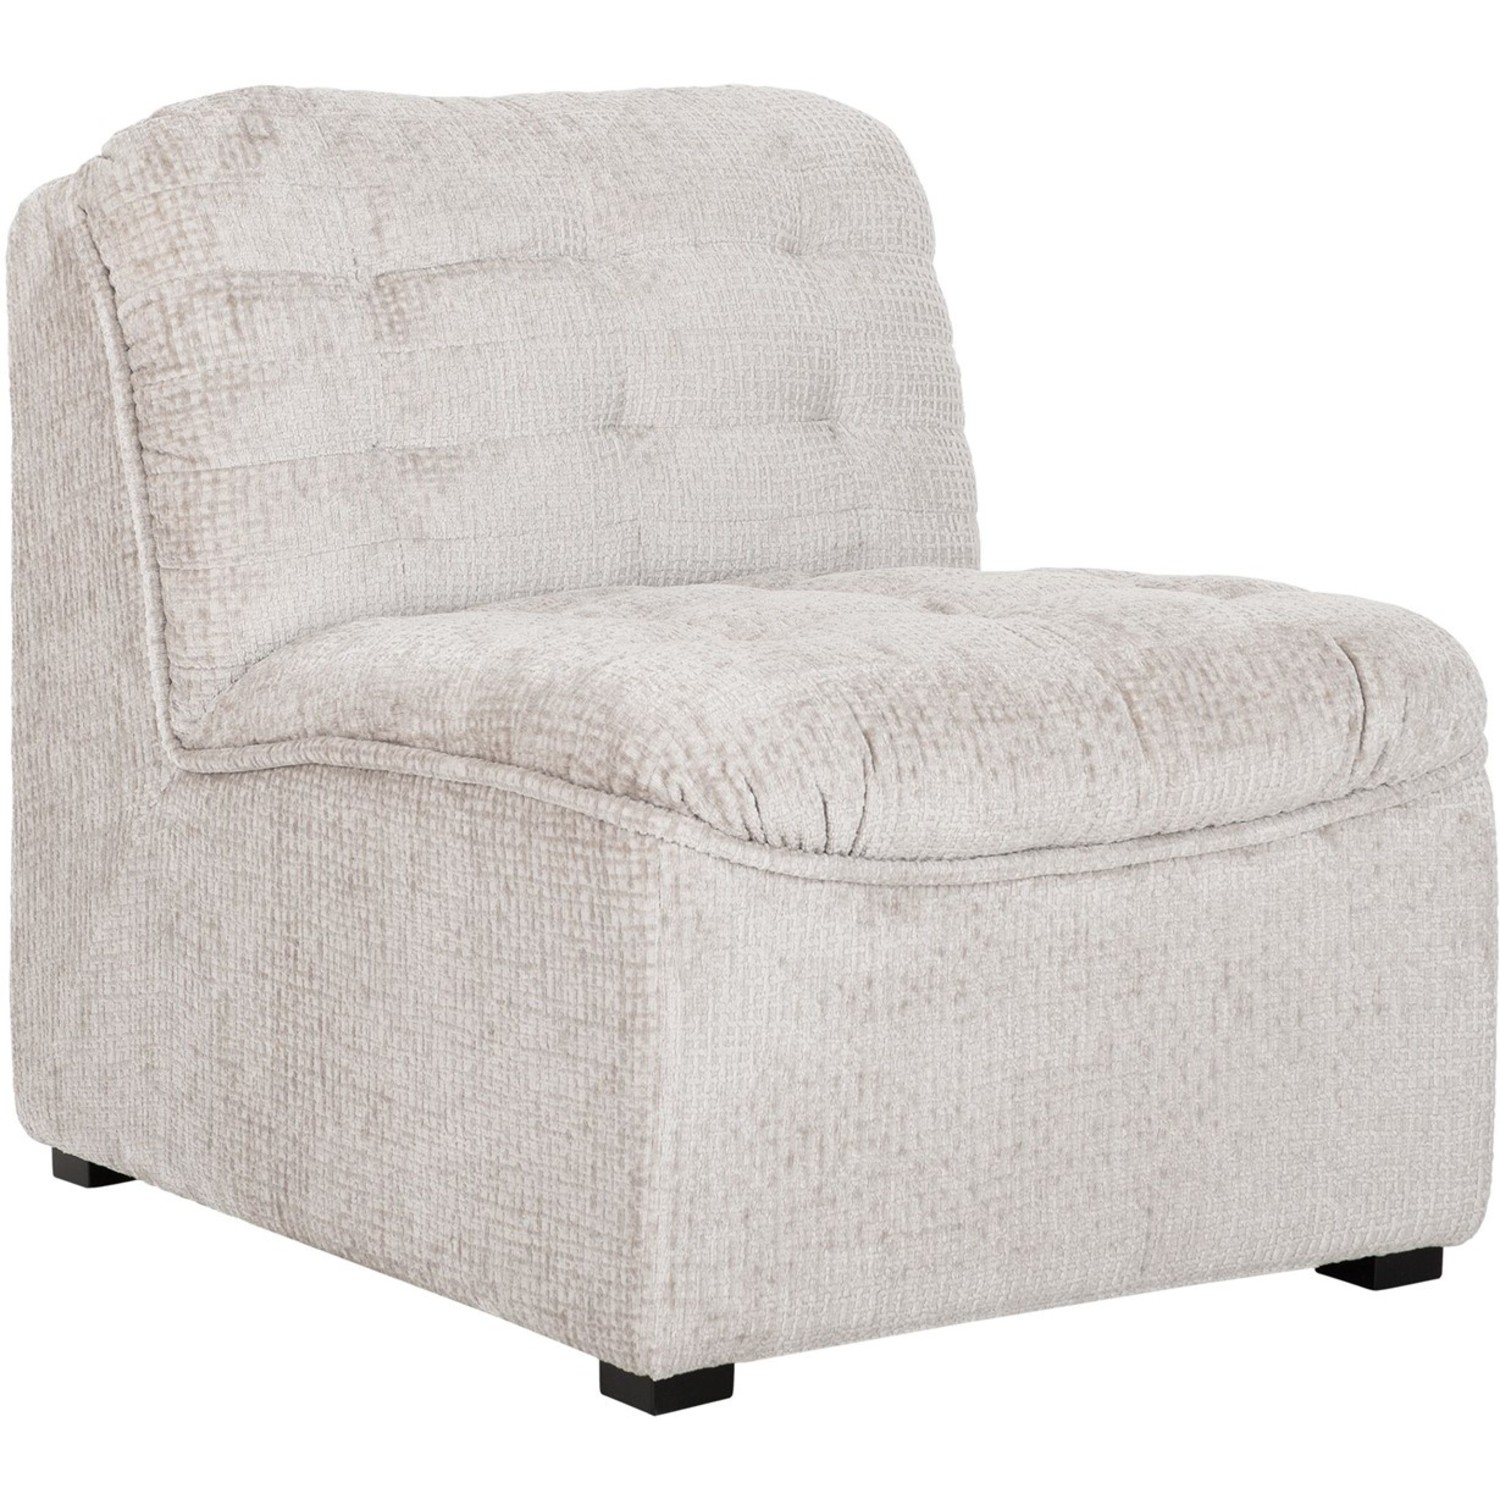 Patois dutje niet voldoende Must Living fauteuil Liberty in stof Glamour naturel wit -  Homecompanyshop.nl